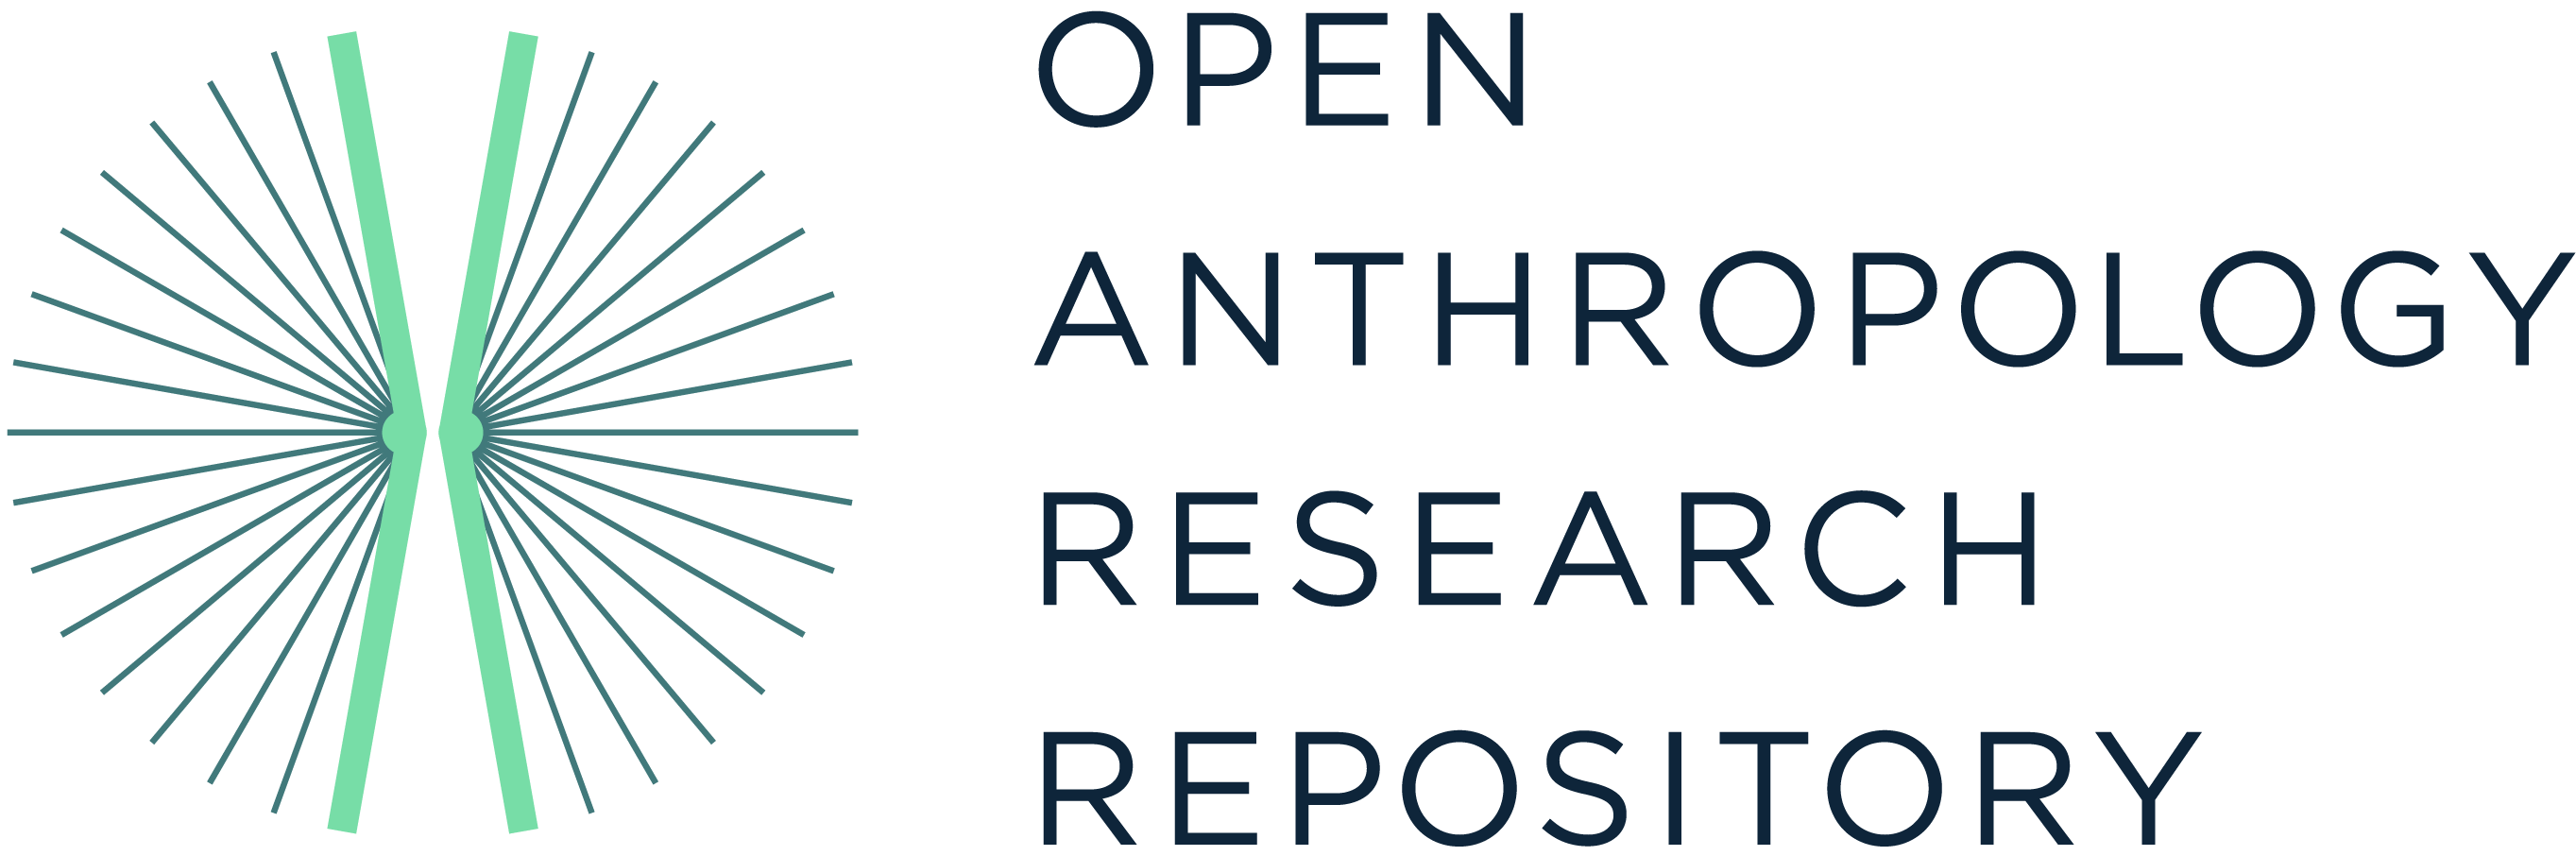 Open Anthropology Research Repository